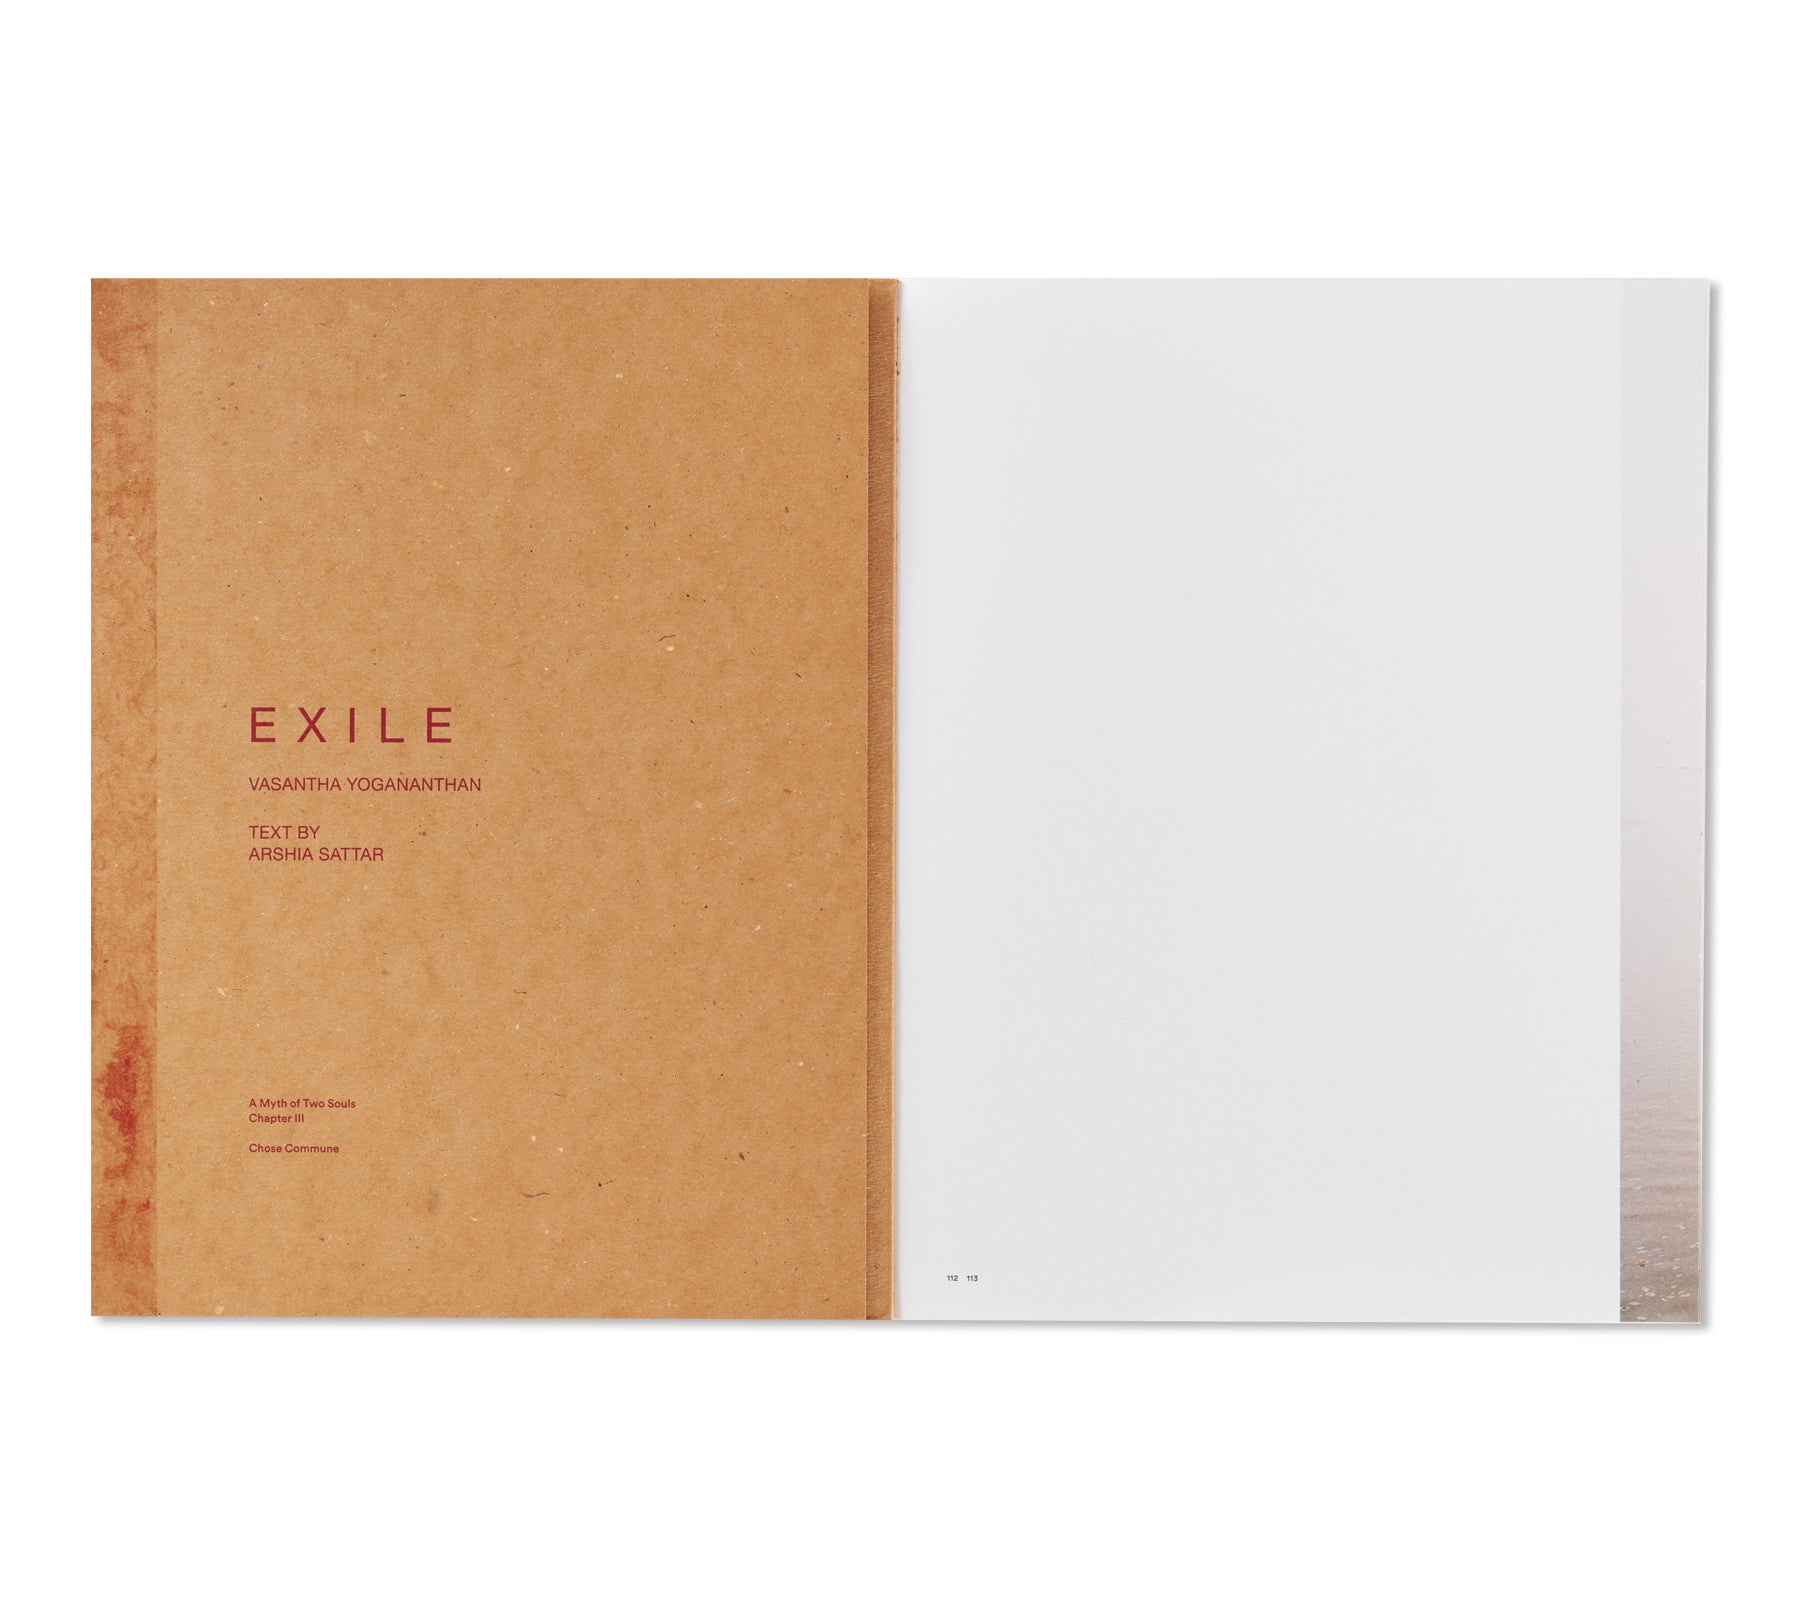 EXILE by Vasantha Yogananthan [SIGNED]